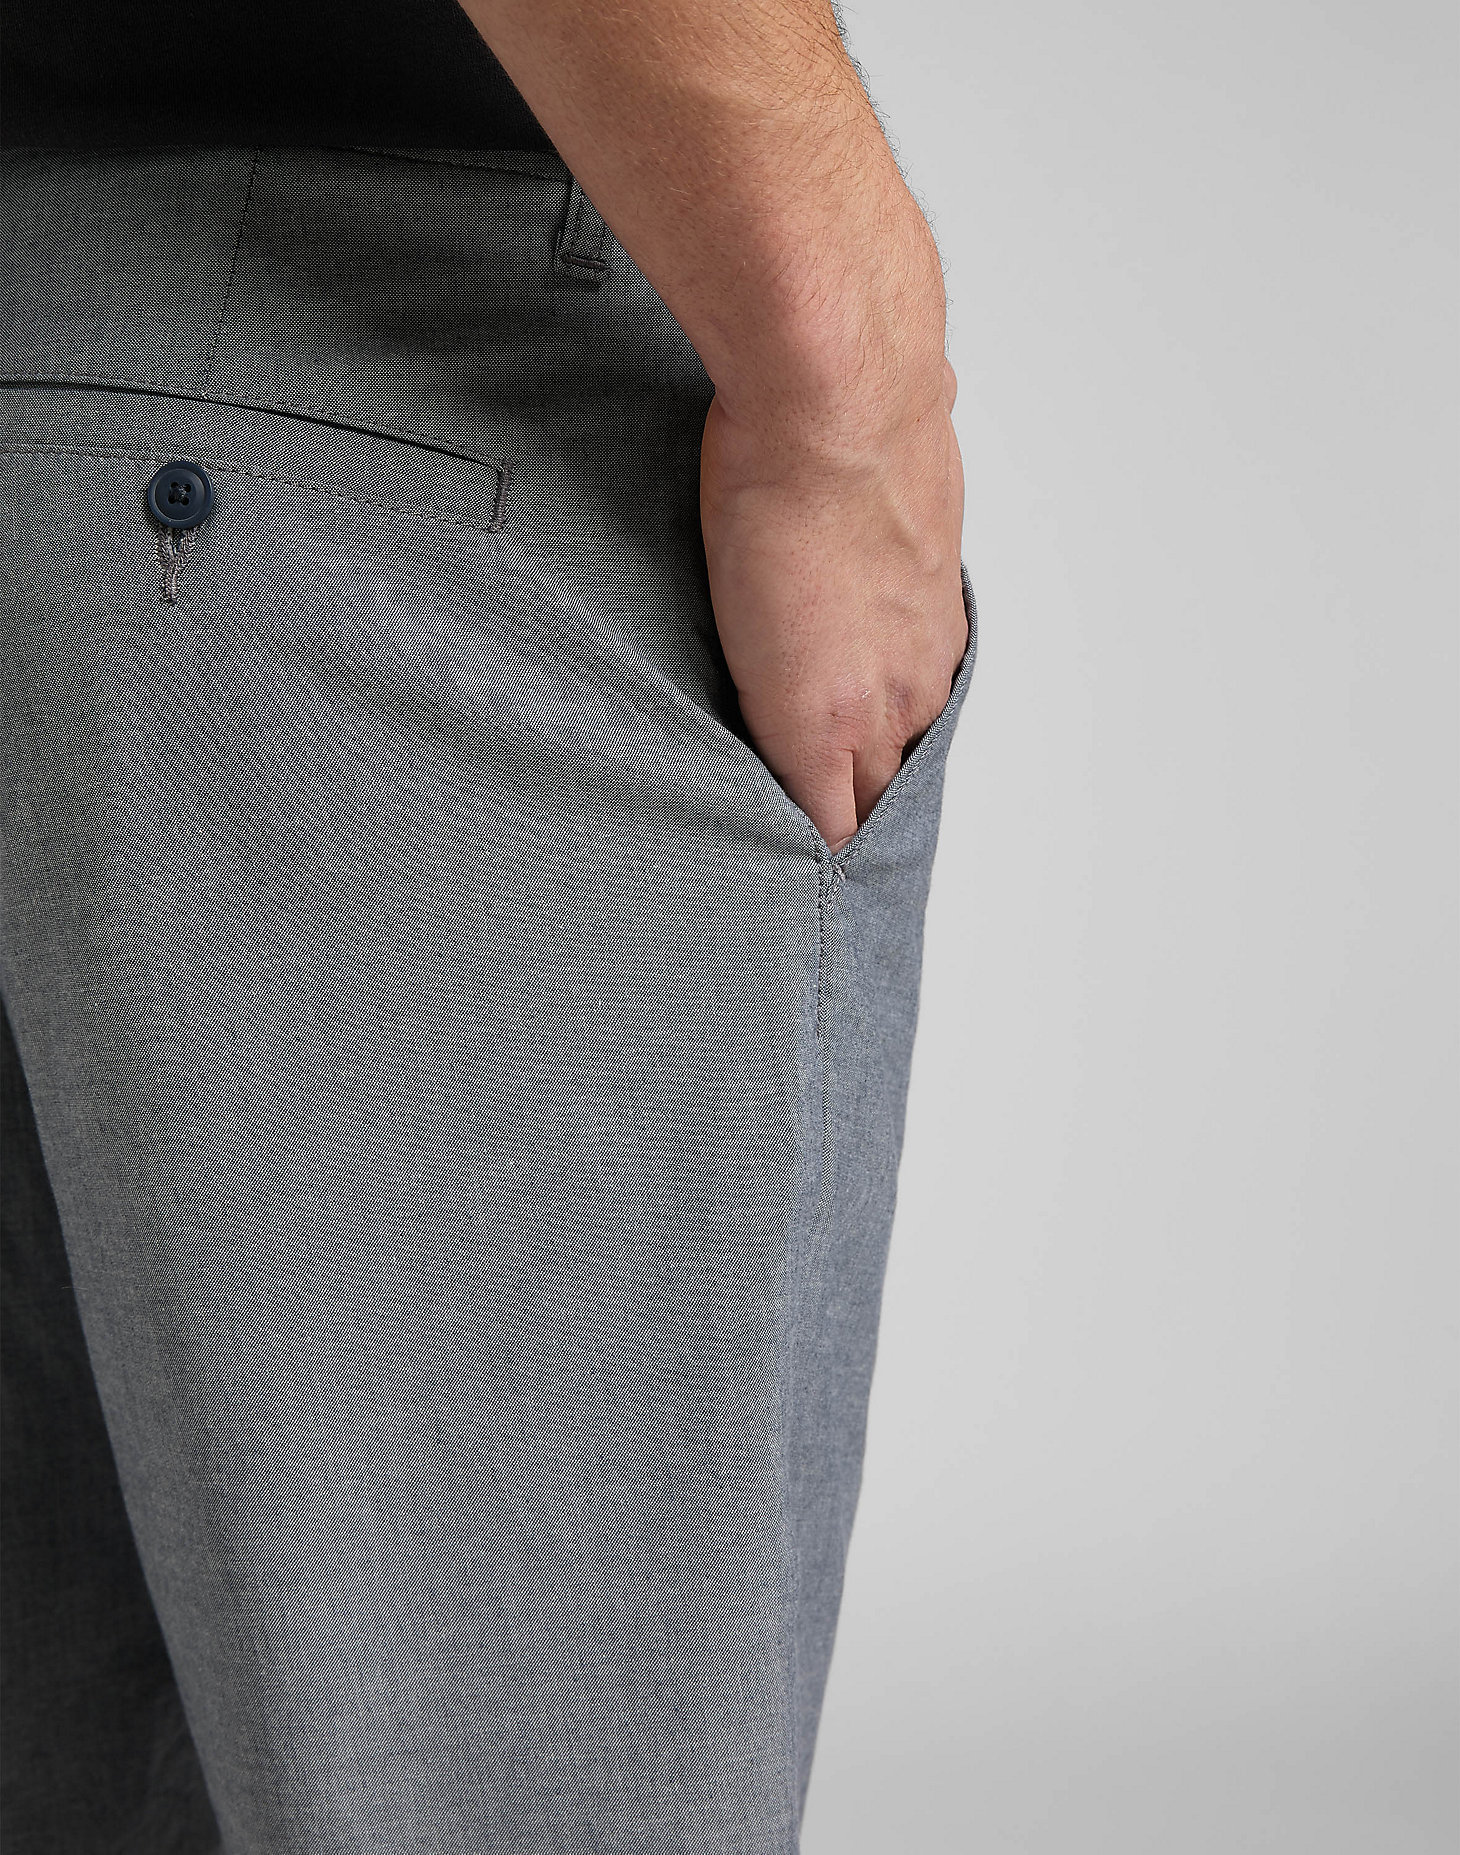 Extreme Comfort Chino Short in Chambray alternative view 4